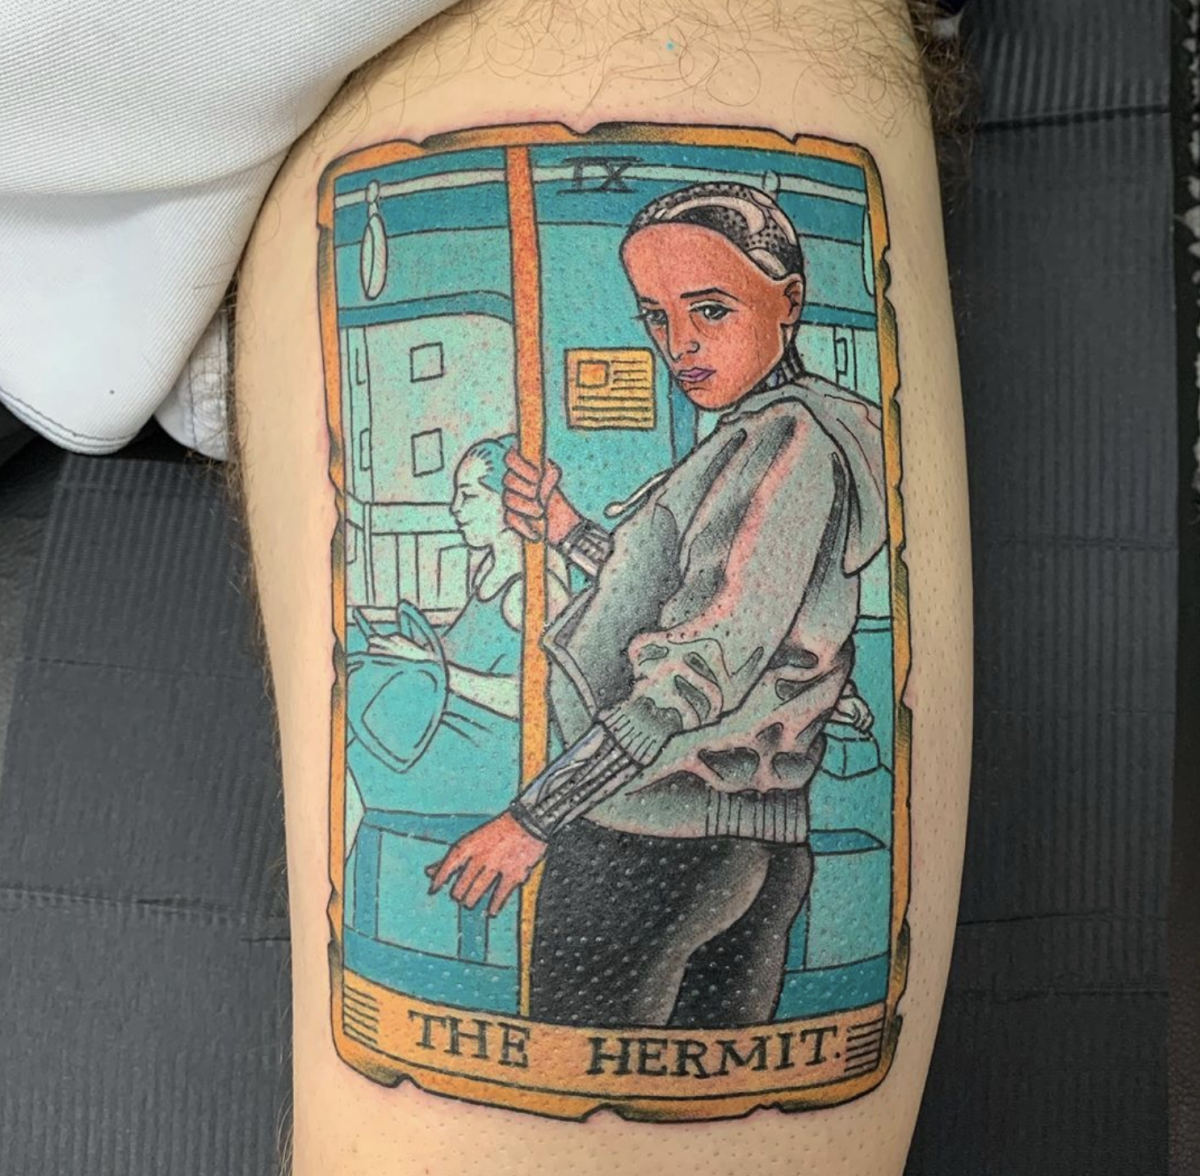 A charming interpretation of the Hermit by Steve Black @allofone666 at All of One Tattoo in Weston-Super-Mare.